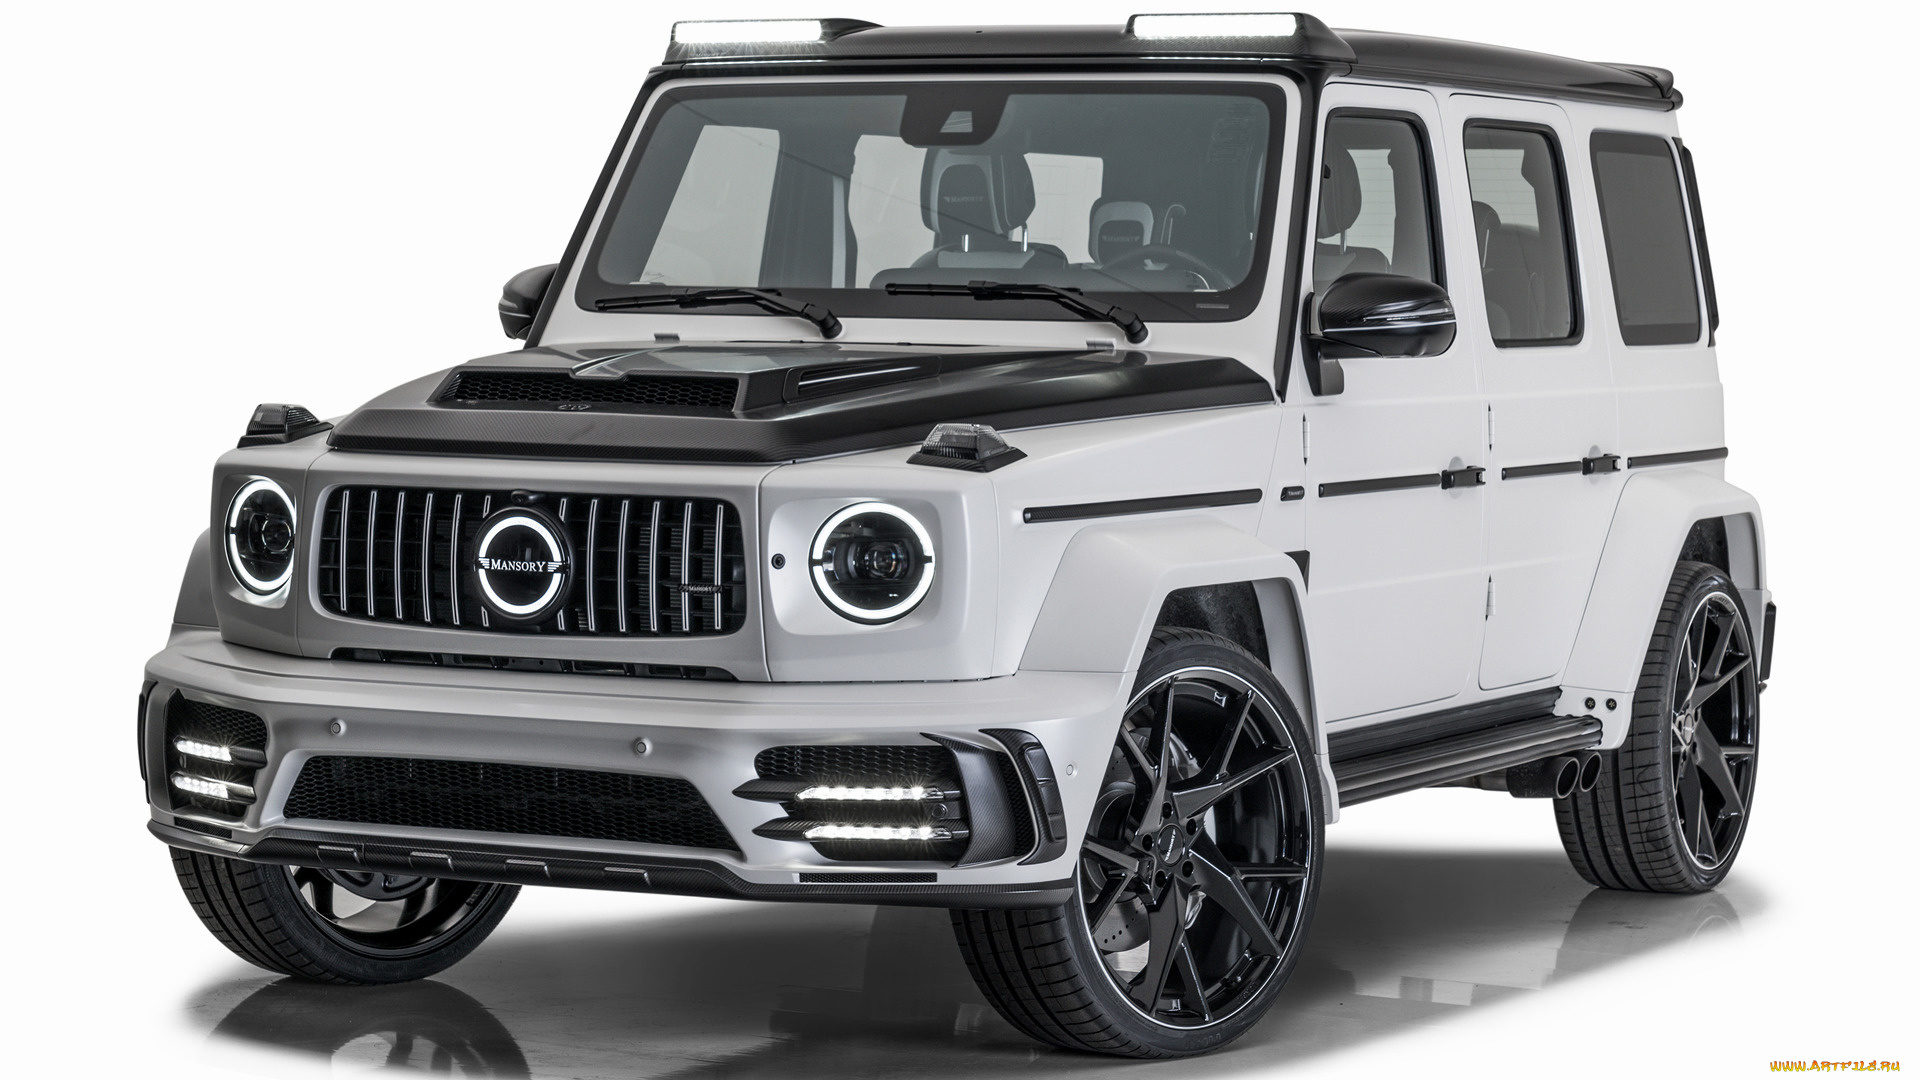 mercedes-benz, g-class, viva, edition, by, mansory, 2021, автомобили, mercedes-benz, mercedes, benz, g, class, viva, edition, by, mansory, 2021